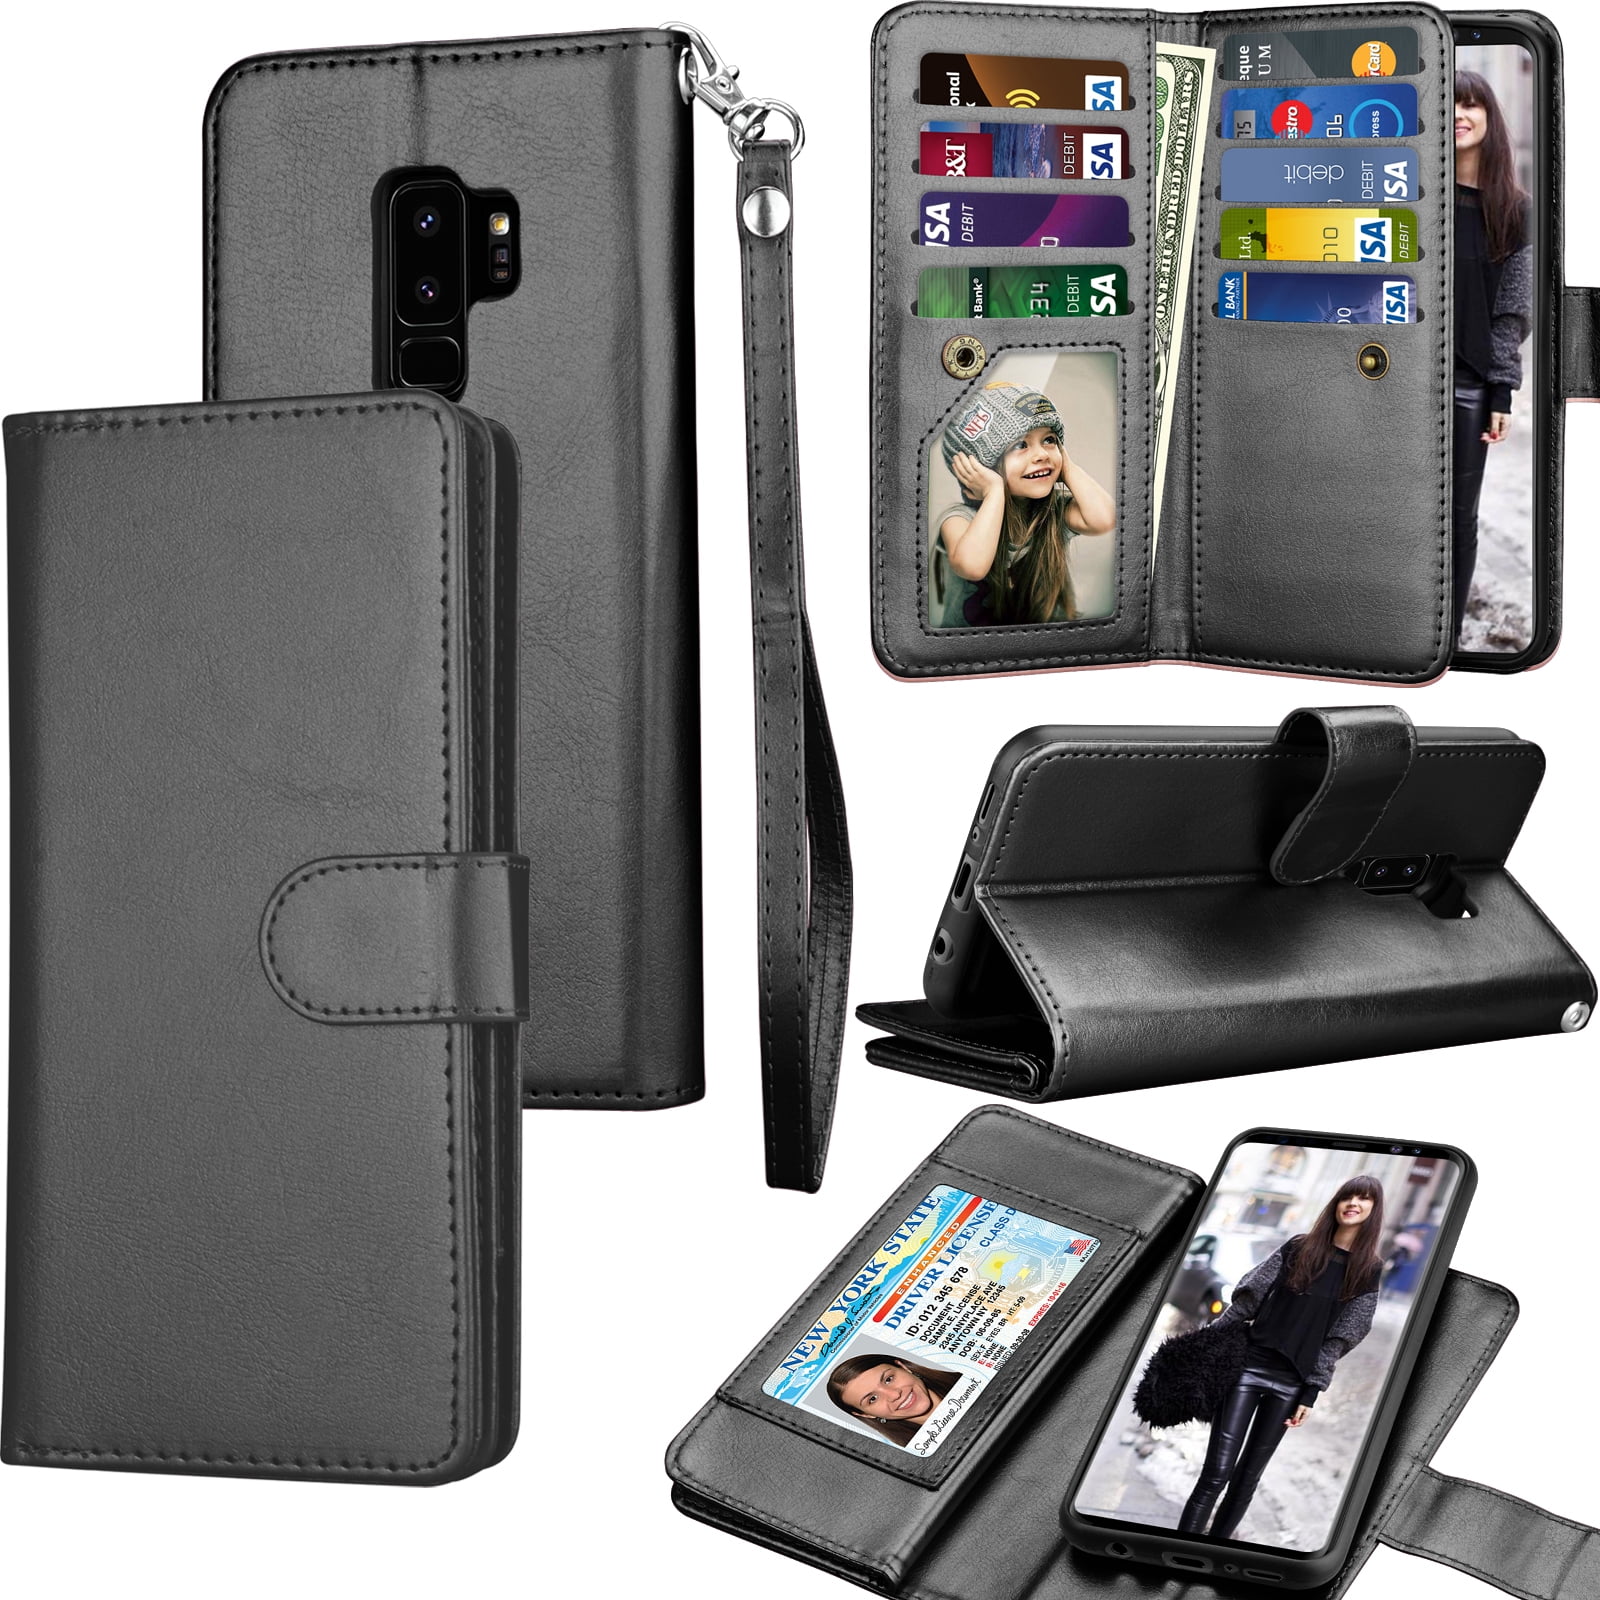 Detachable Magnetic Hard Case & Kickstand Samsung S9 Wallet Case,Samsung Galaxy S9 PU Leather Case,Spritech Luxury Cash Credit Card Slots Holder Carrying Folio Flip Cover Galaxy S9 Case